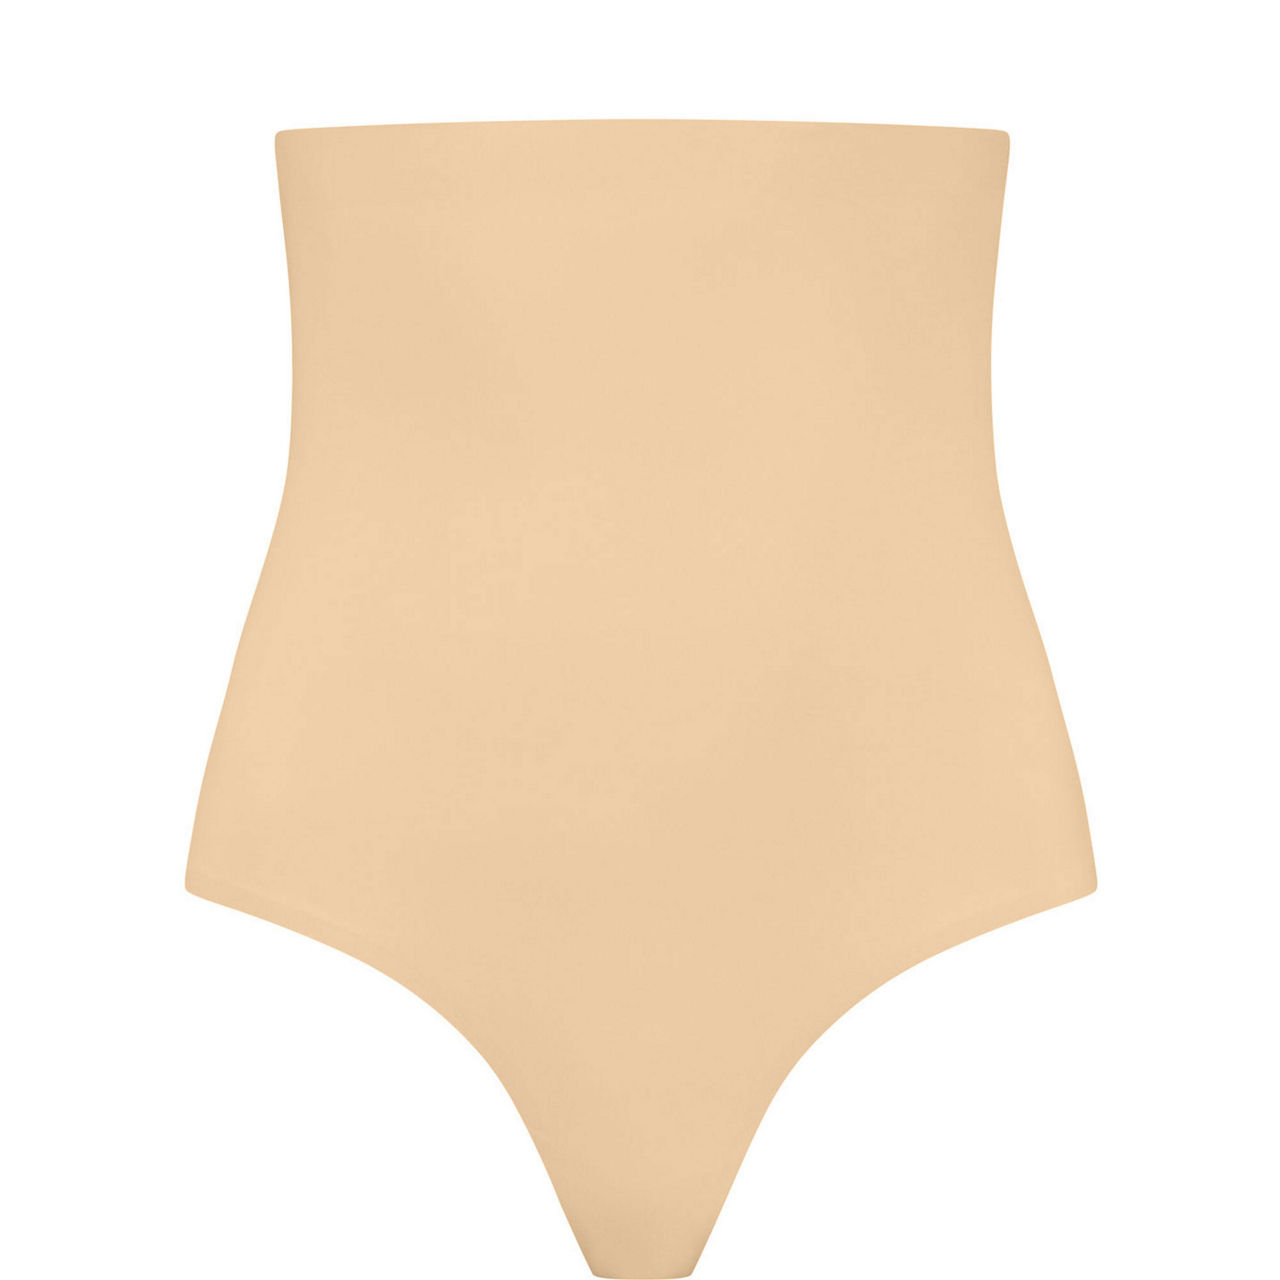 Buy SPANX Suit Your Fancy High Waist Thong Tan online